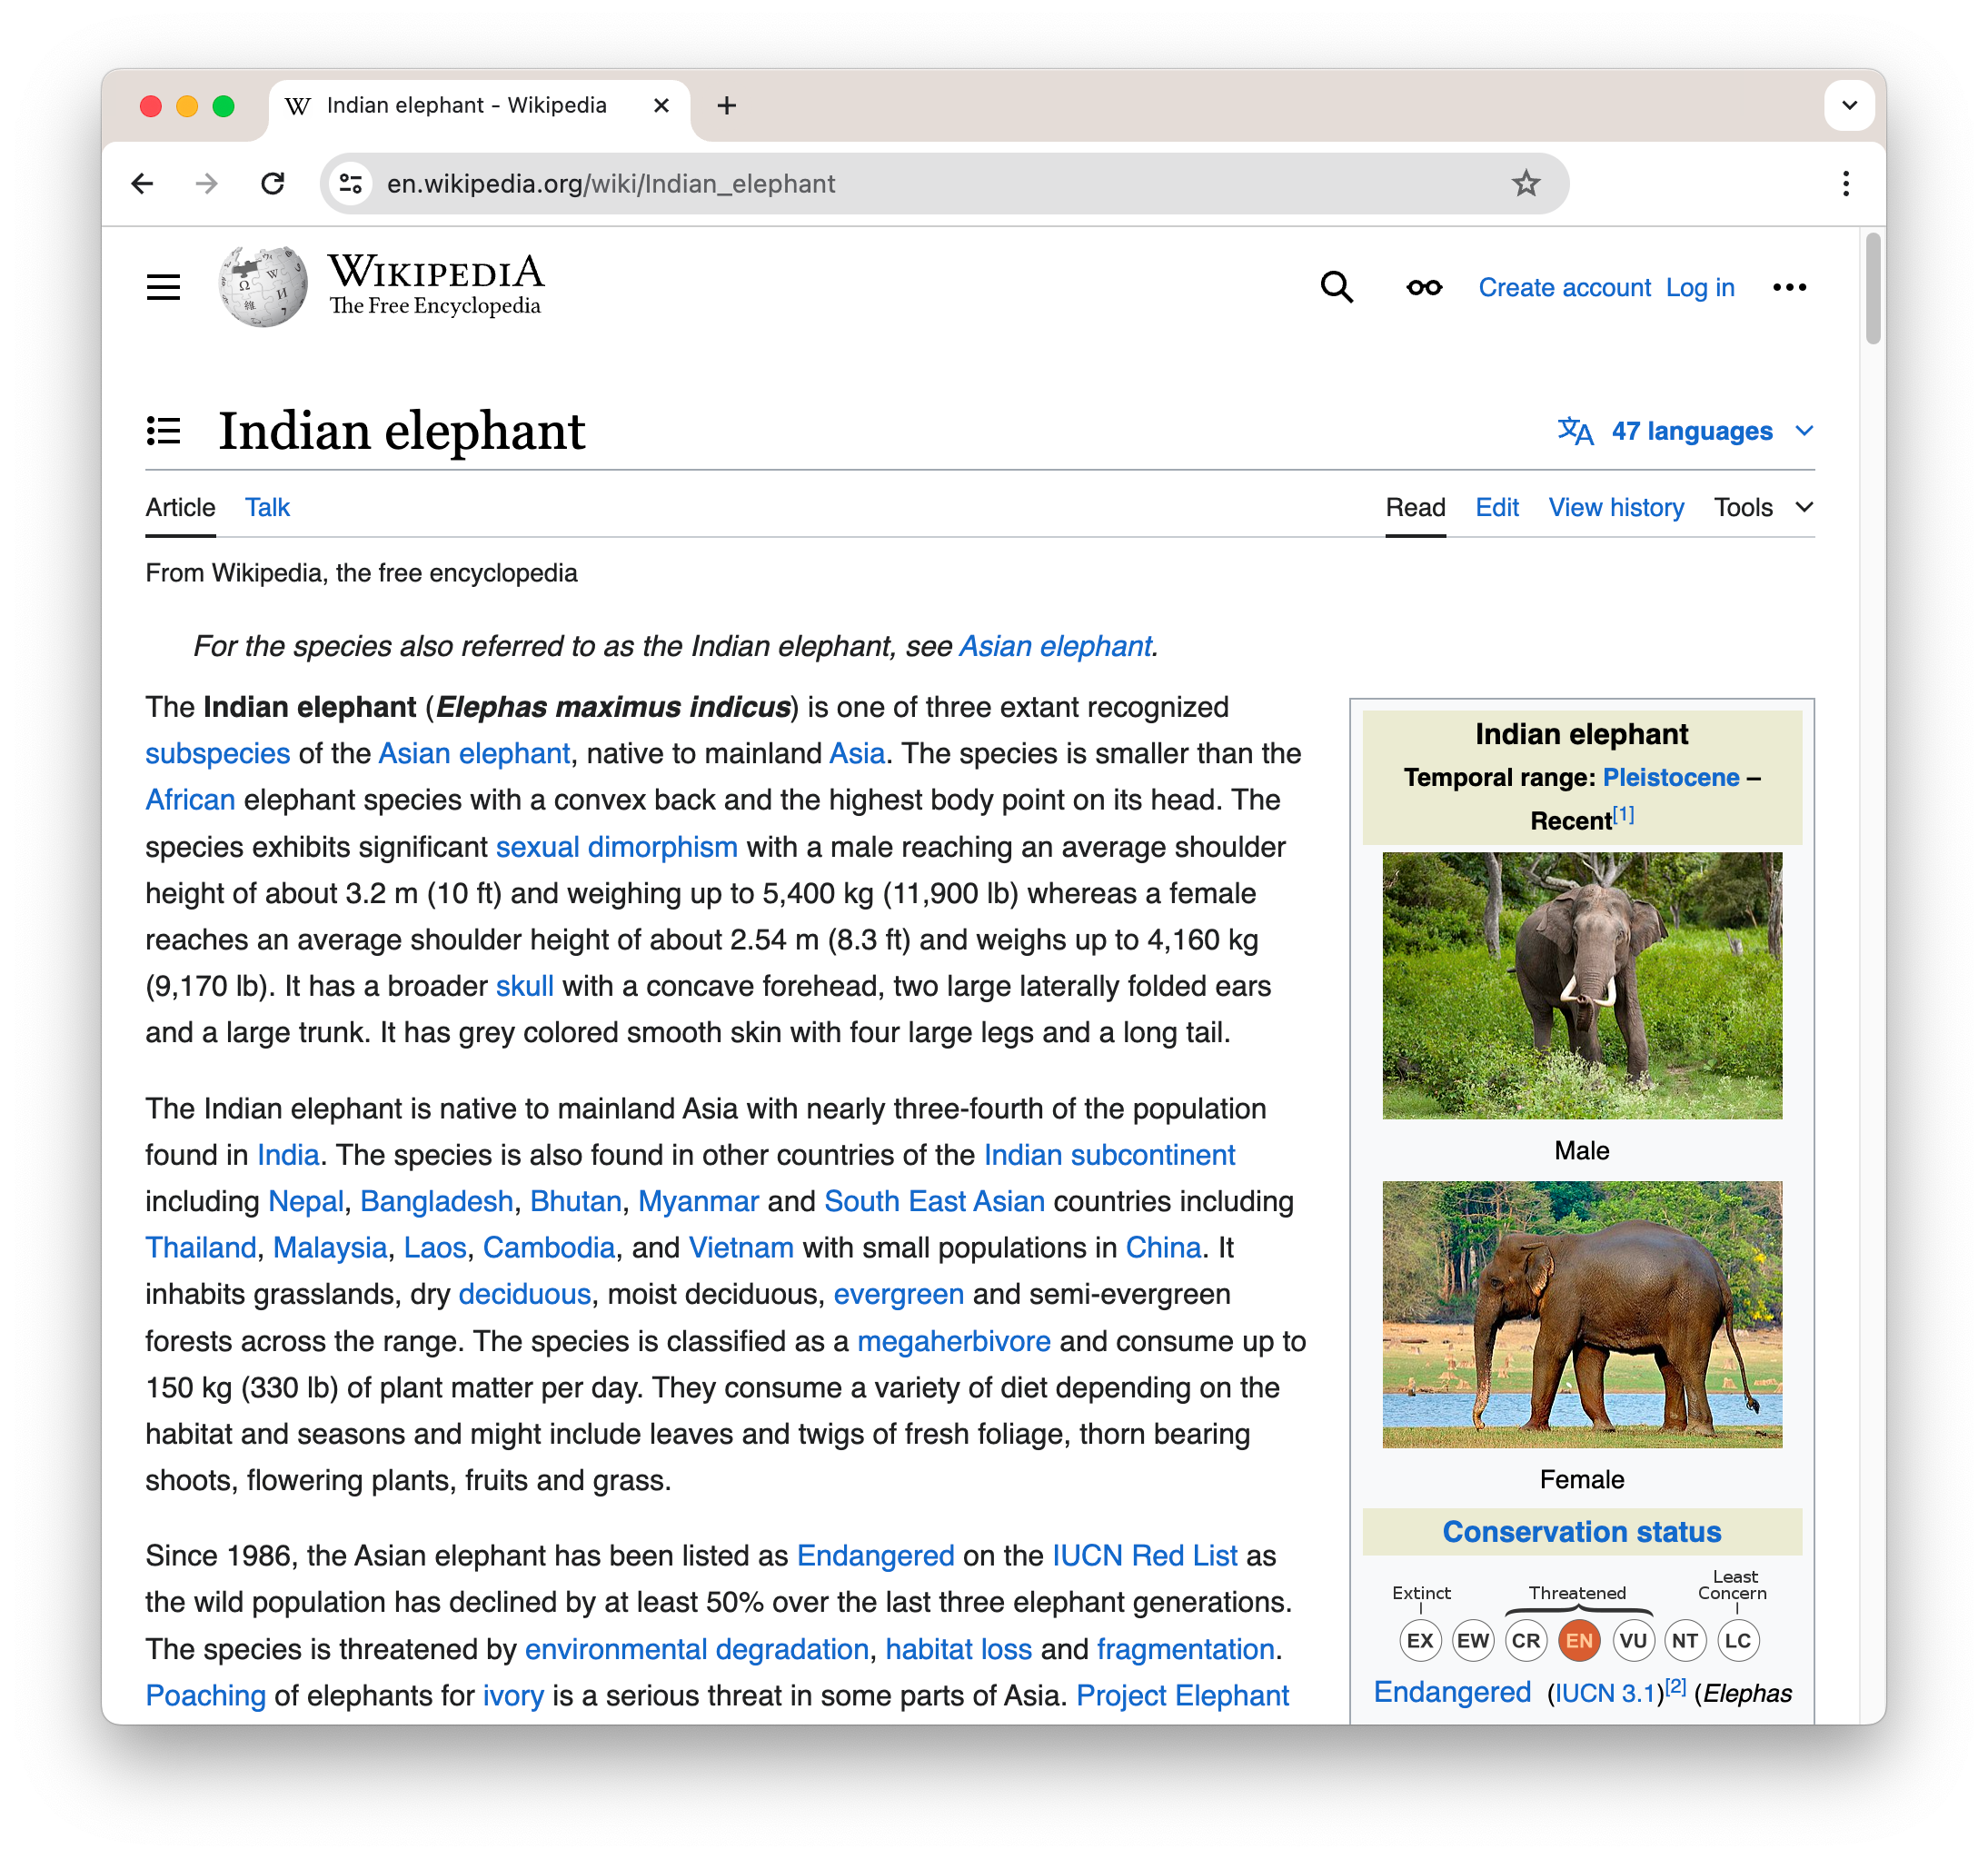 Screenshot of Wikipedia page on Indian elephants, featuring articles, three elephant images, and conservation status.